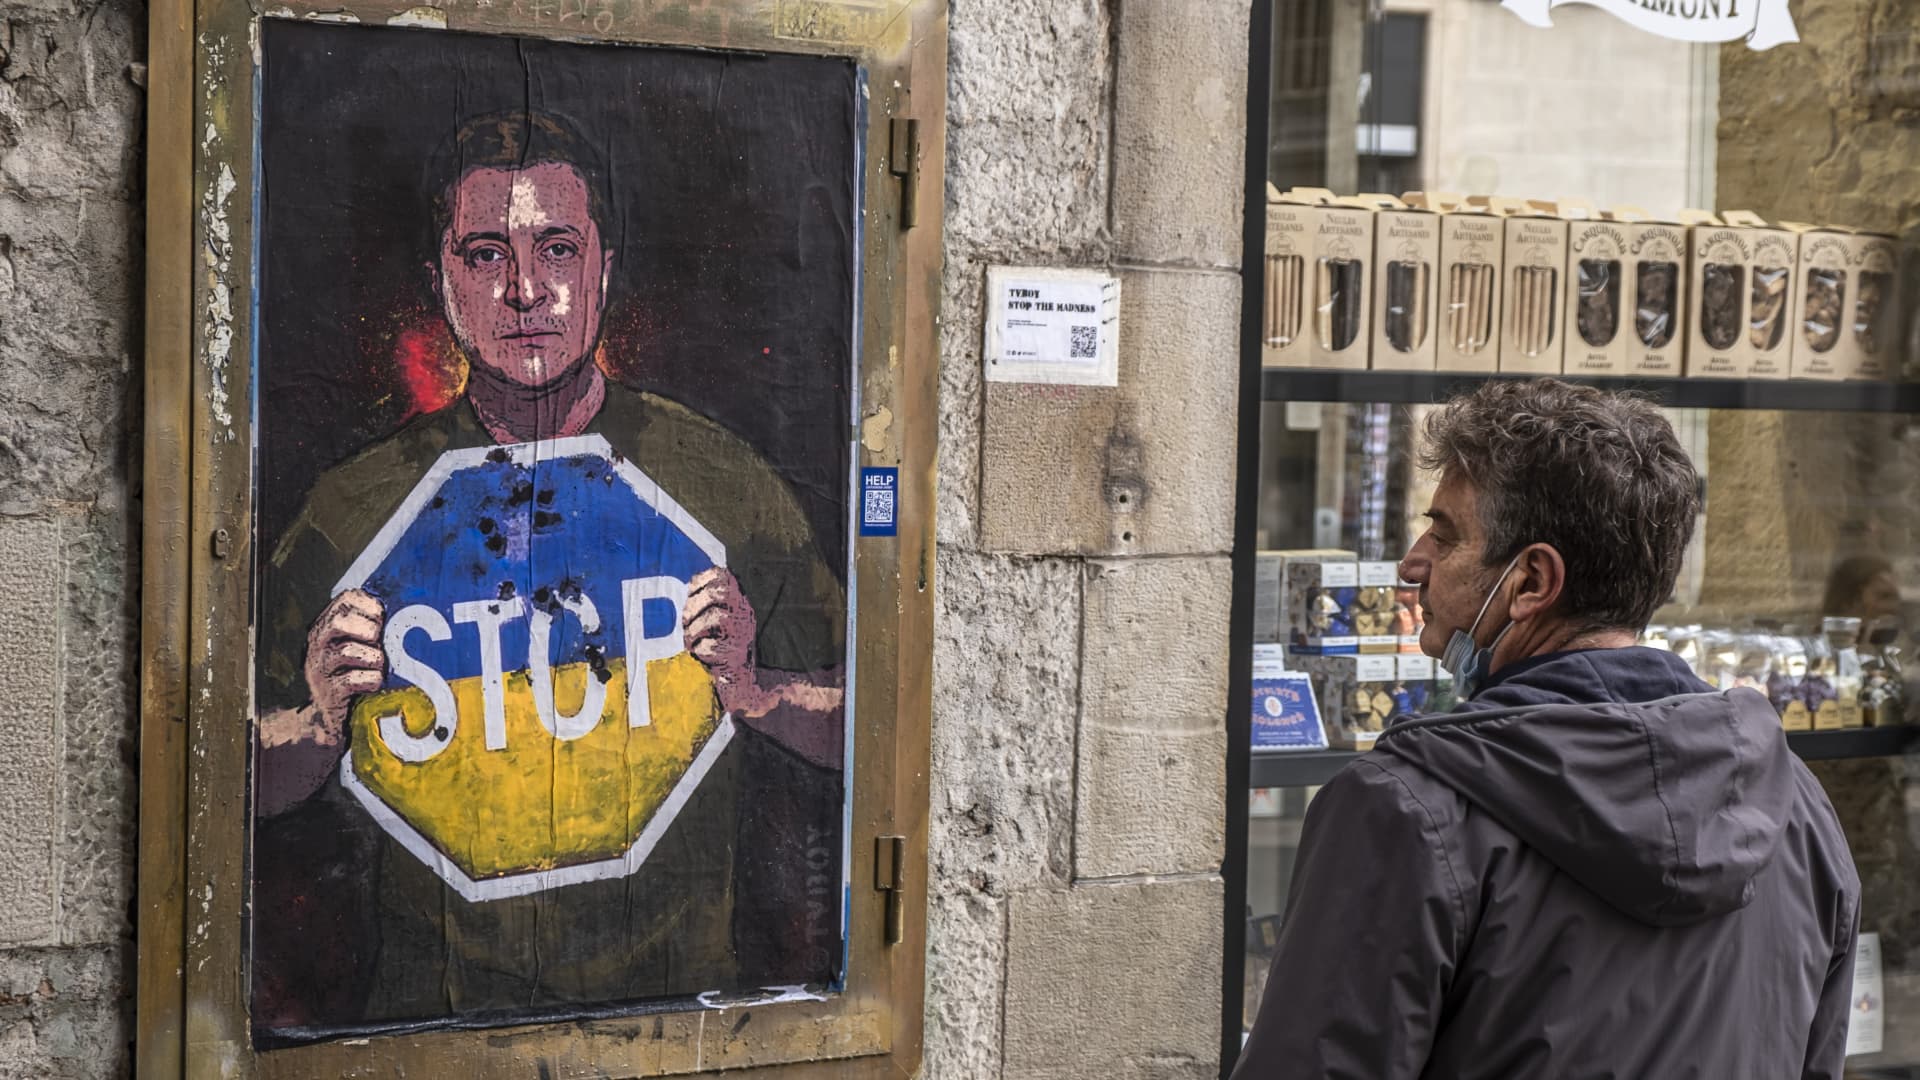 A passer-by is seen observing the graphic representation of Ukraine's president Zelensky calling for an end to the Russian invasion is seen in Plaza de Sant Jaume.